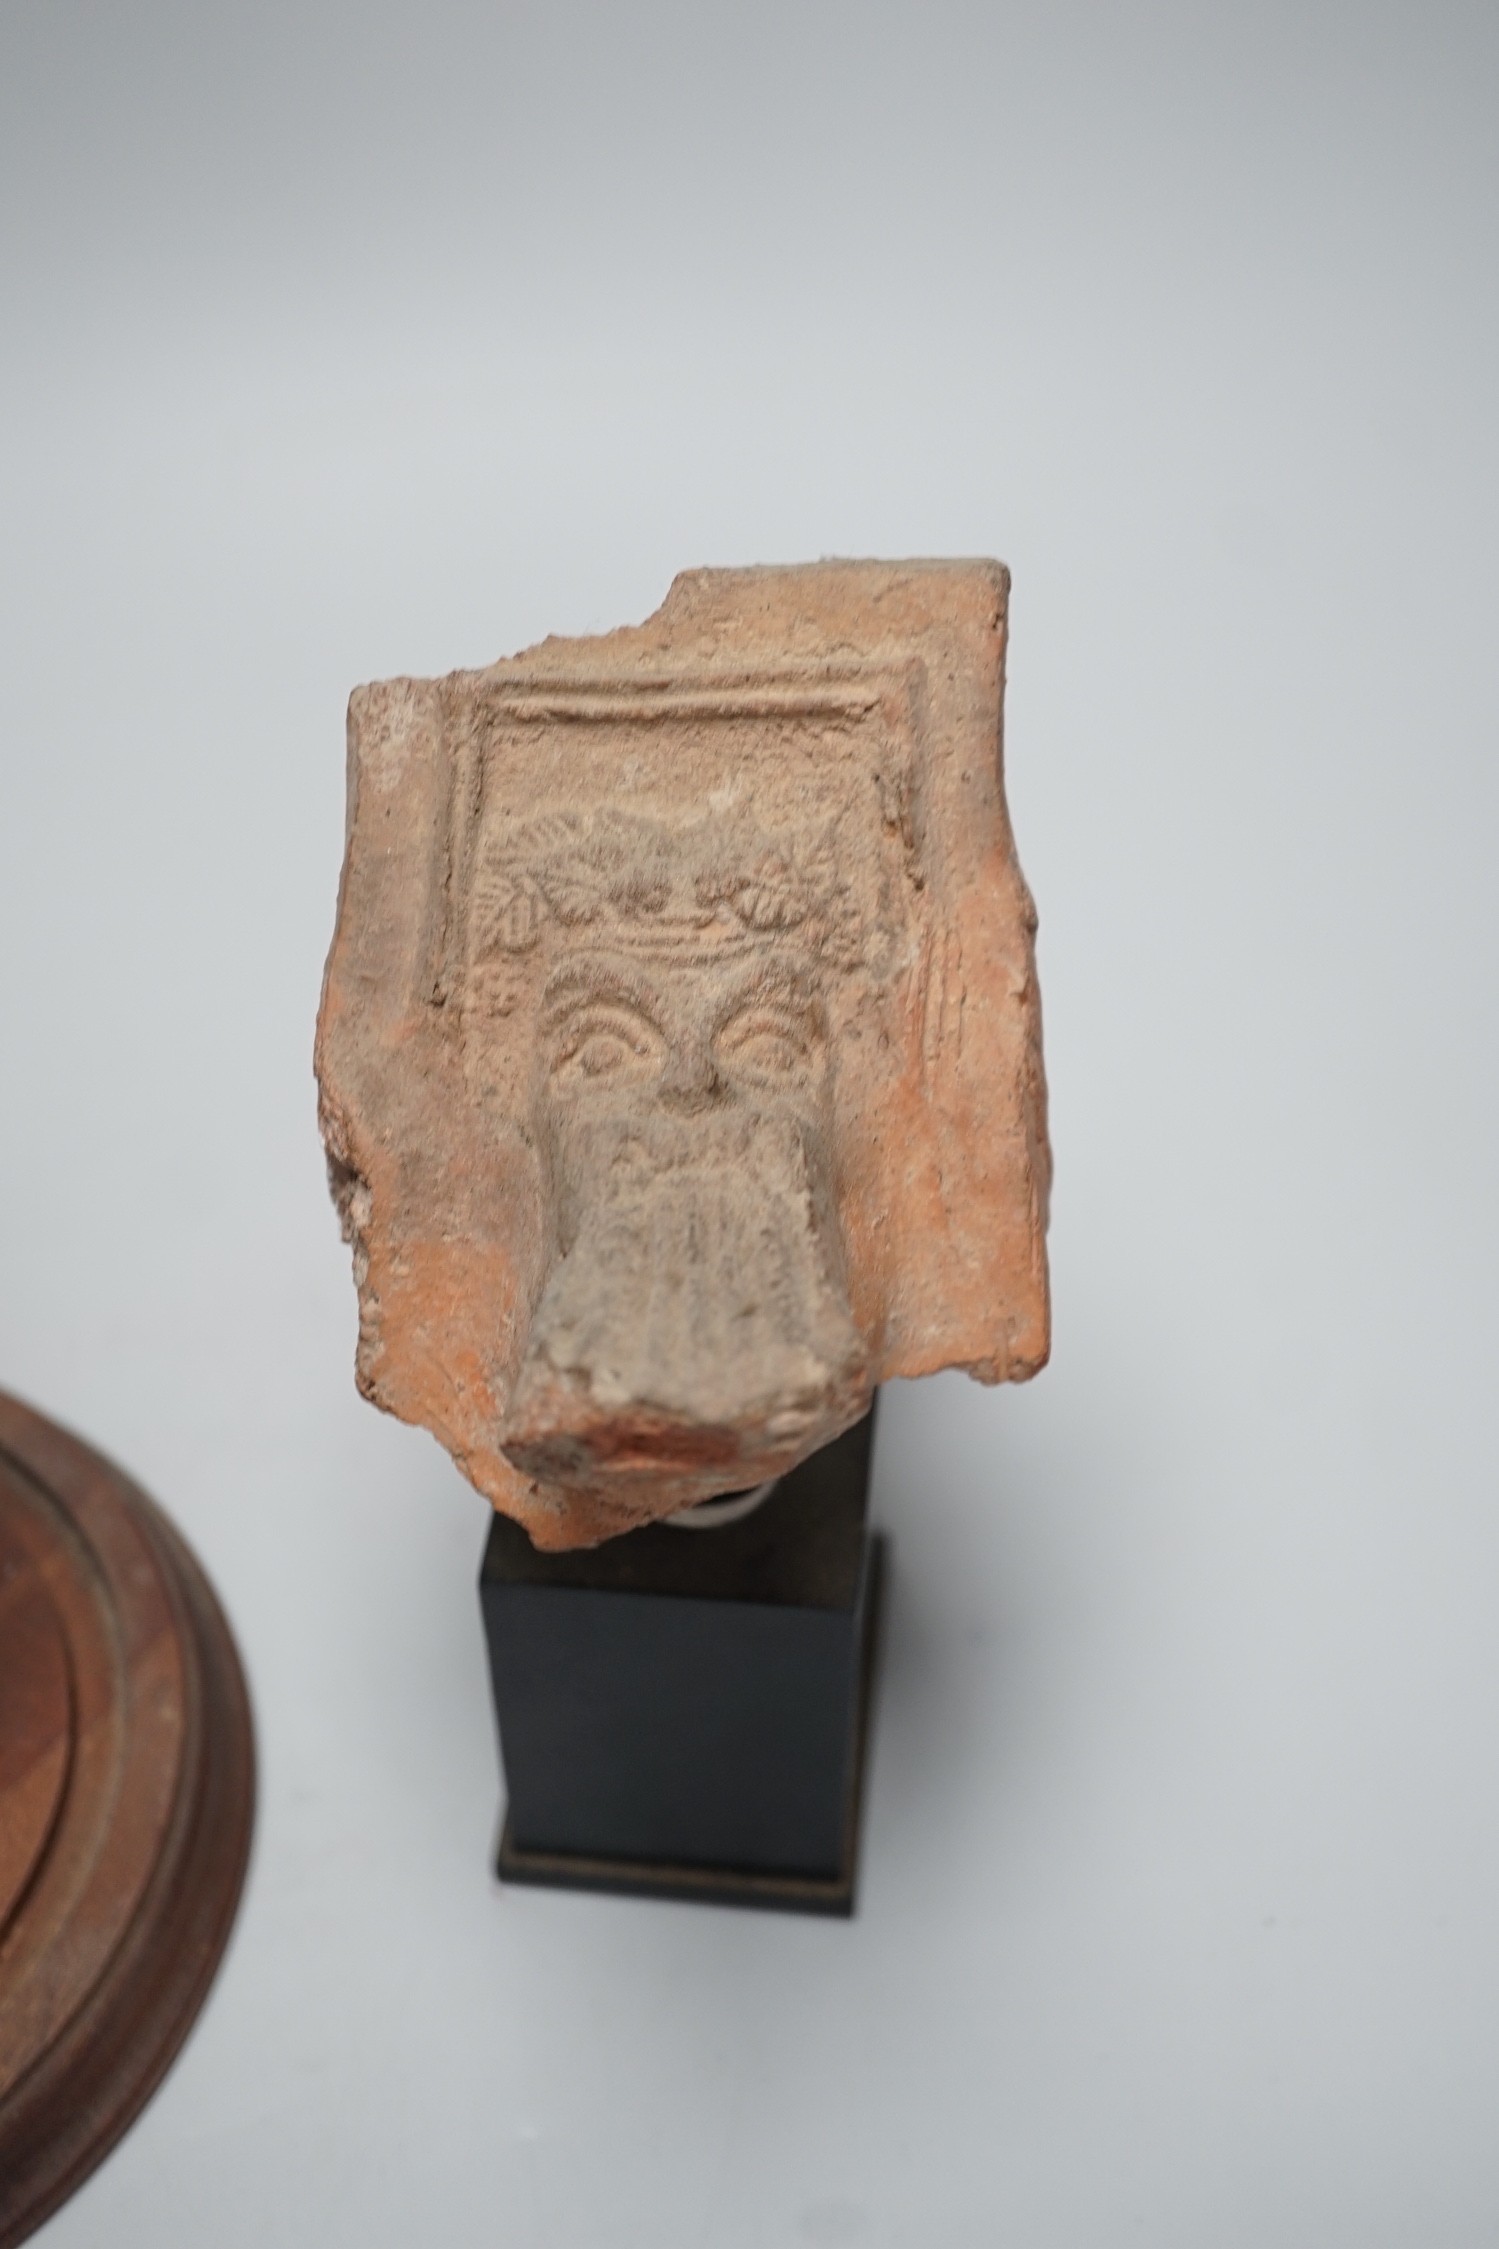 A Hellenistic terracotta brazier fragment with Dionysos mask, 2nd-1st century BCE., and a bronze fragment of a votive figure or figure of a goddess, probably Etruscan, 13.5 cm high excluding stand